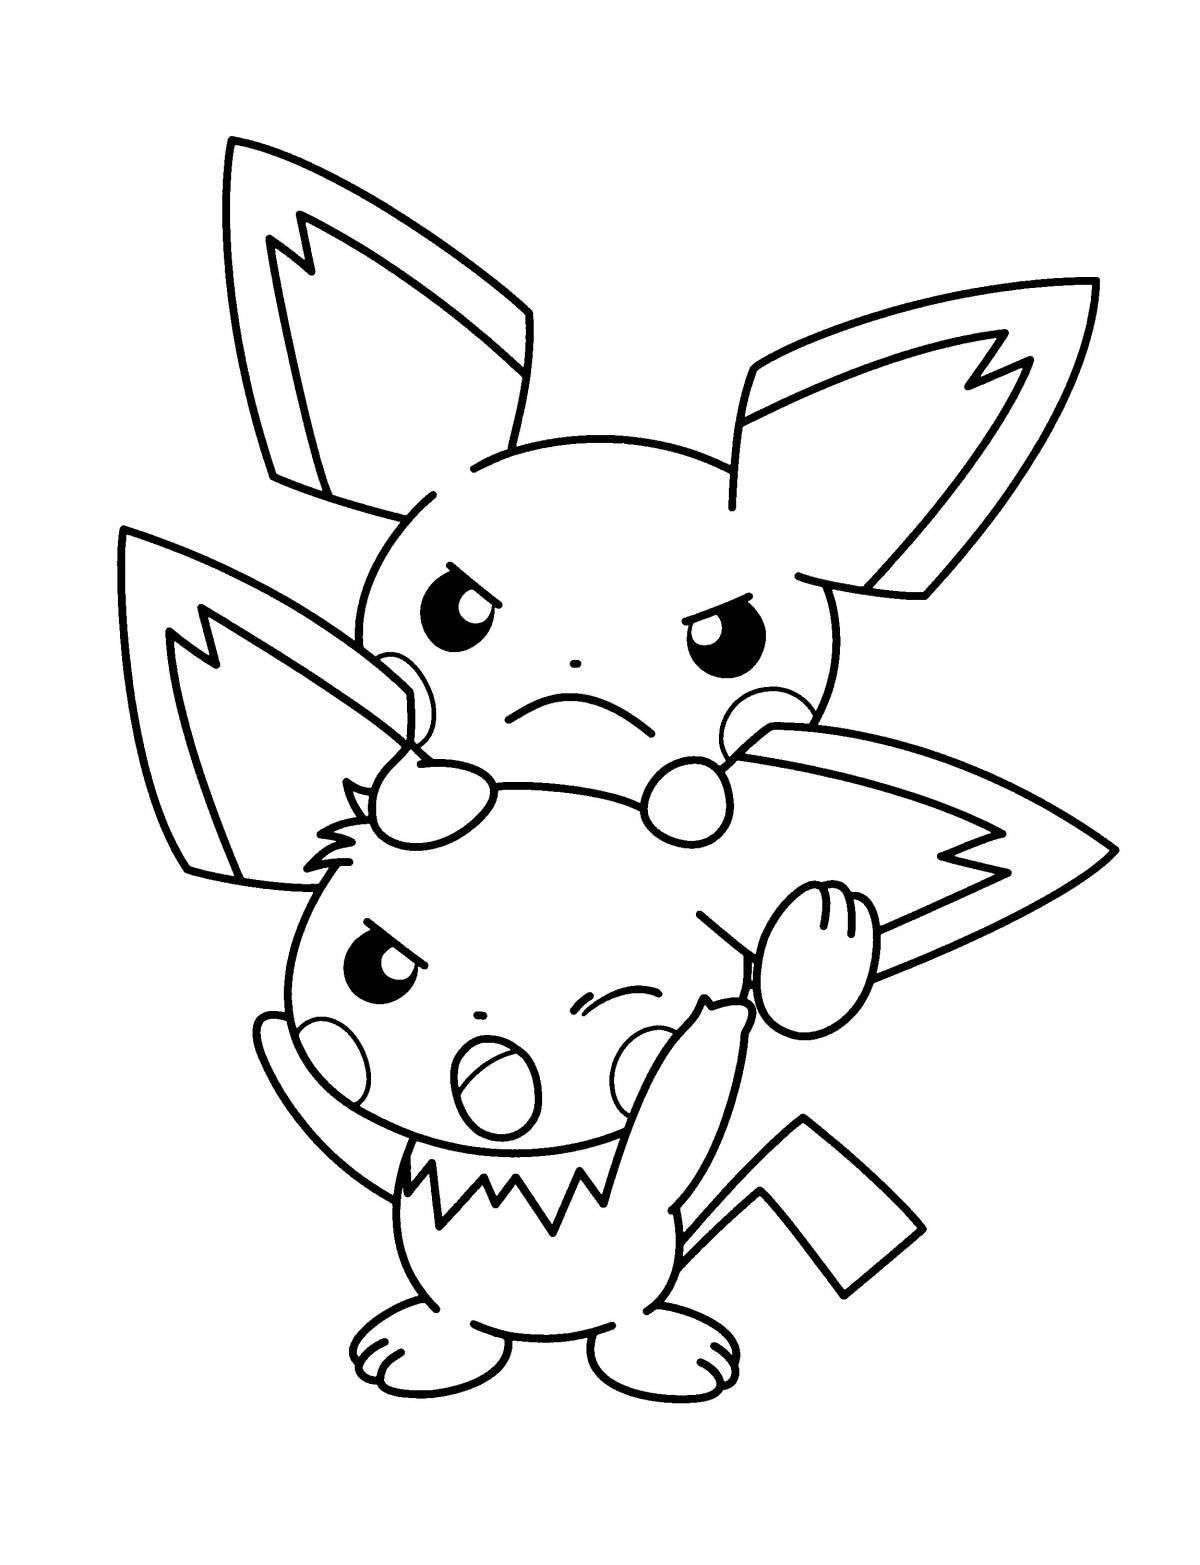 Tempting pokemon pictures coloring pages